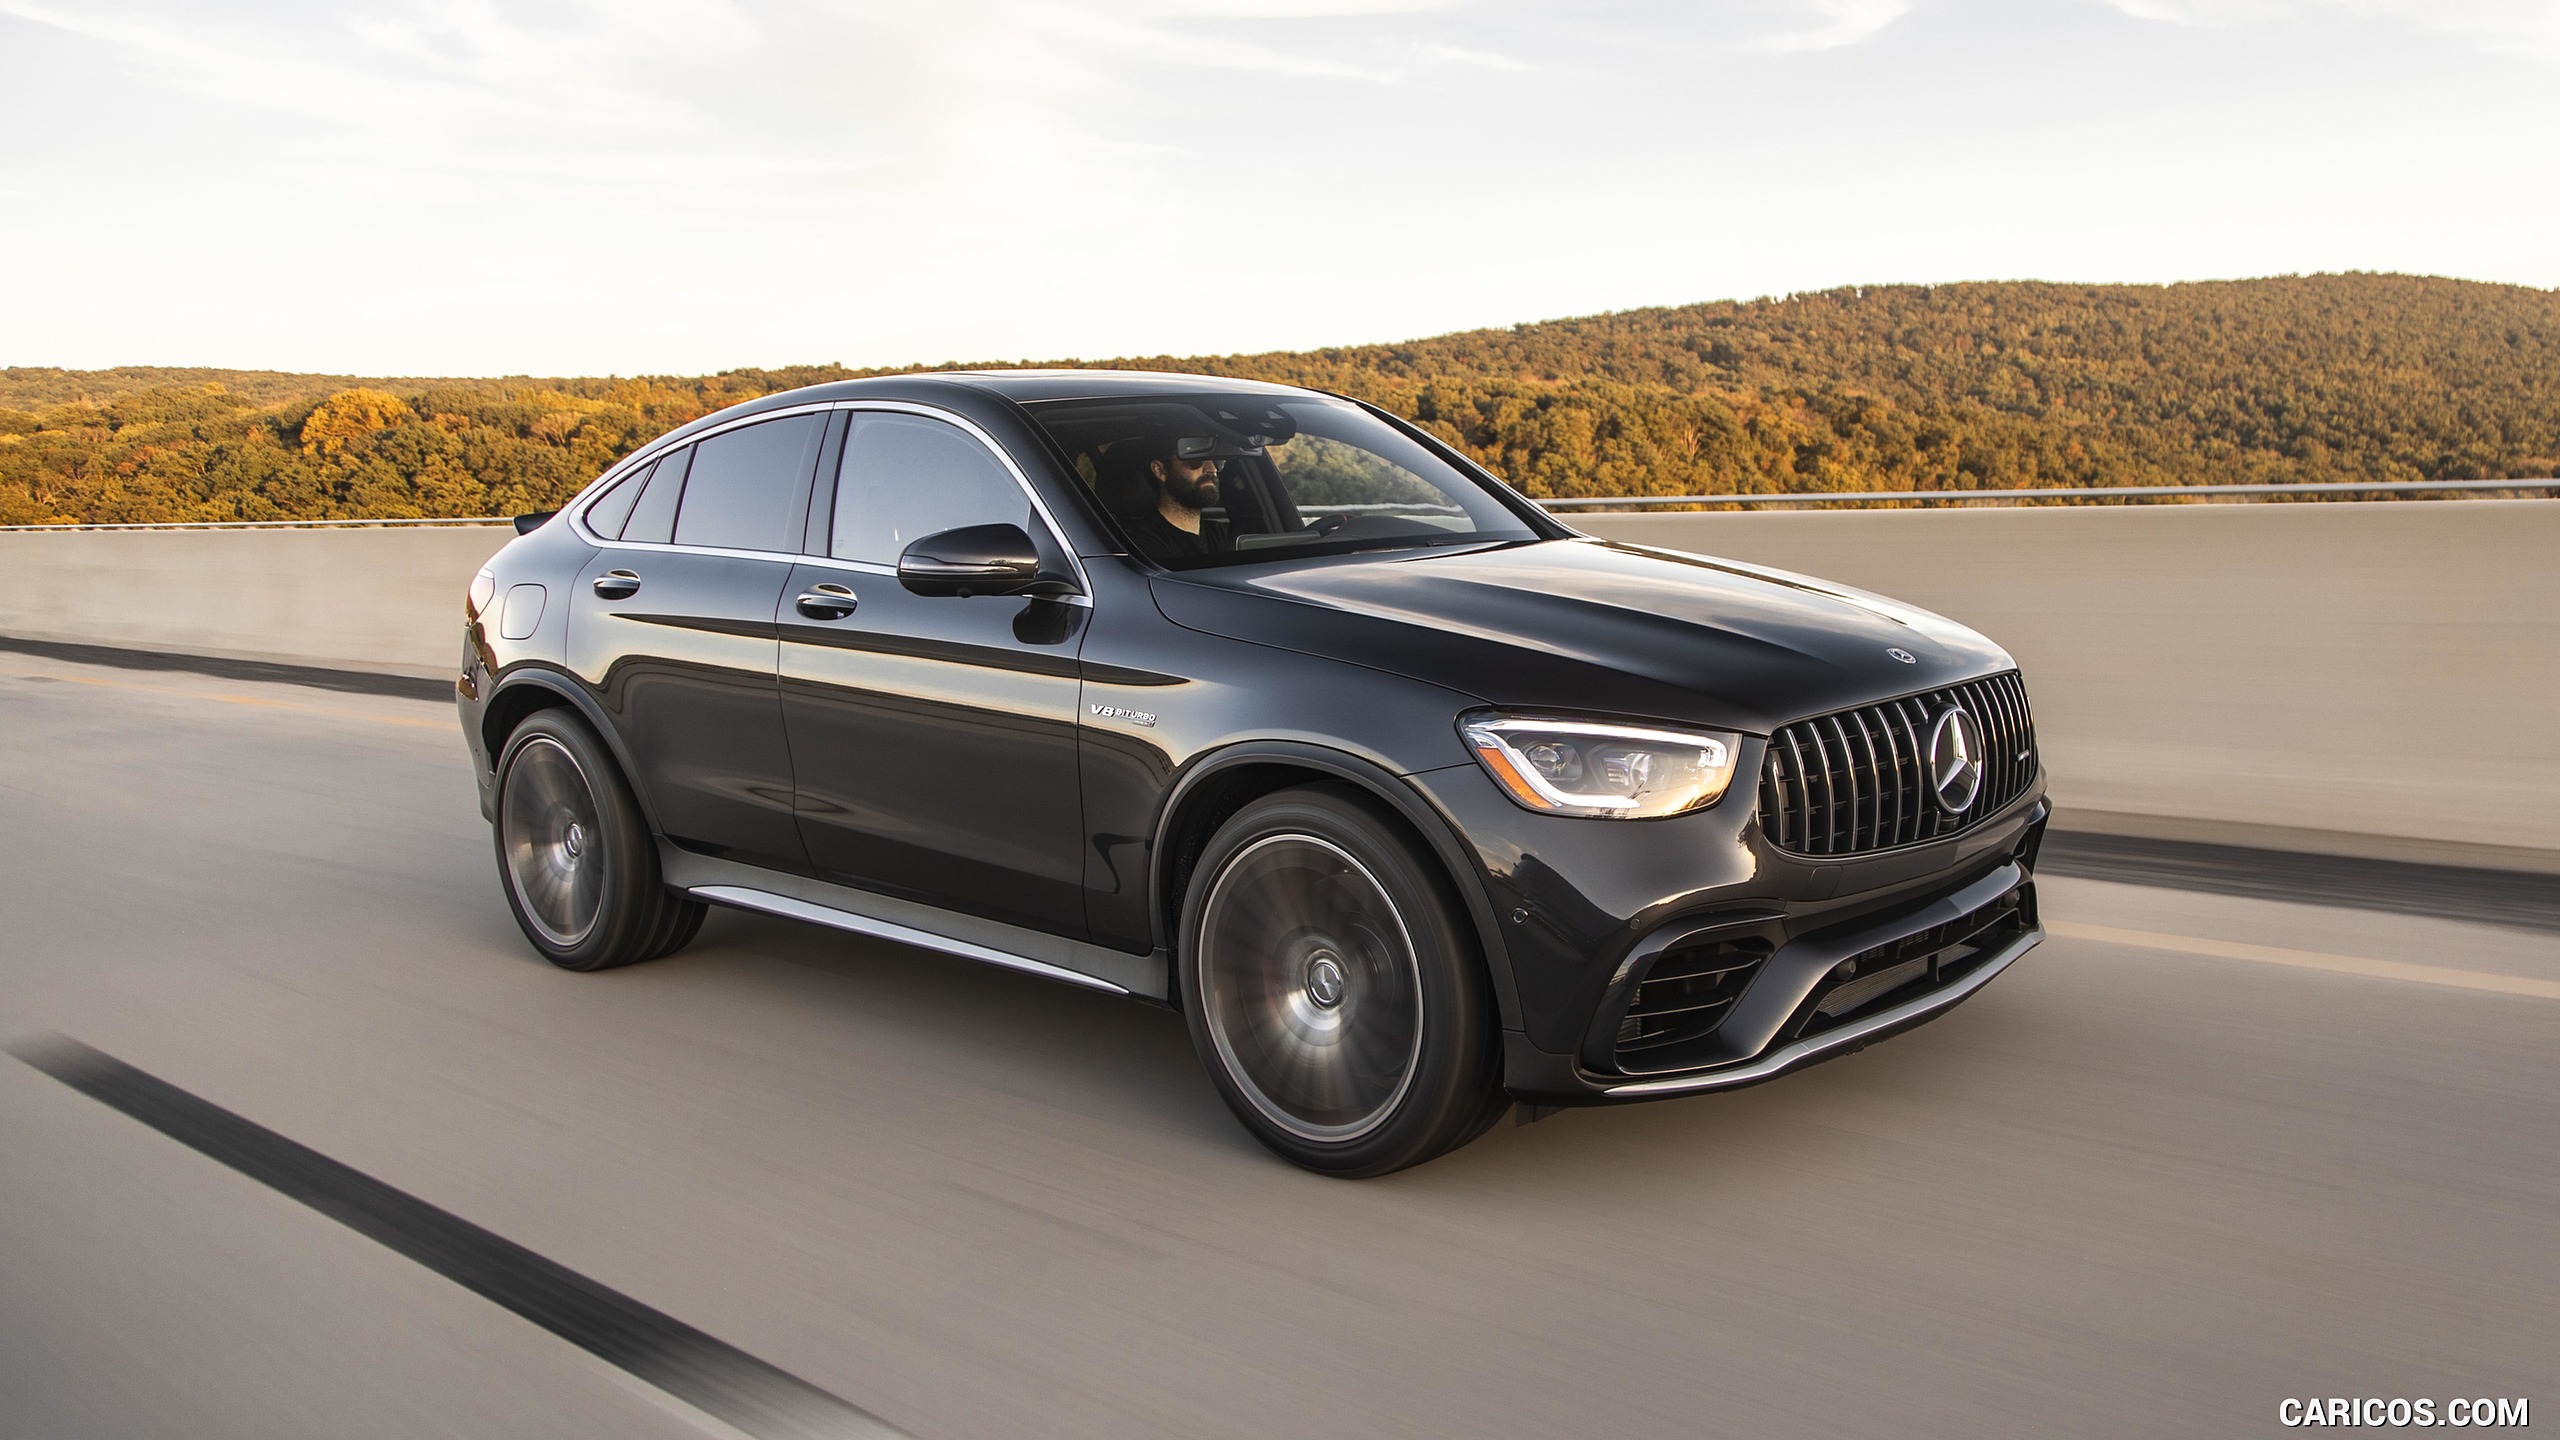 2020 Mercedes-AMG GLC 63 S Coupe (US-Spec) - Front Three-Quarter, #40 of 102